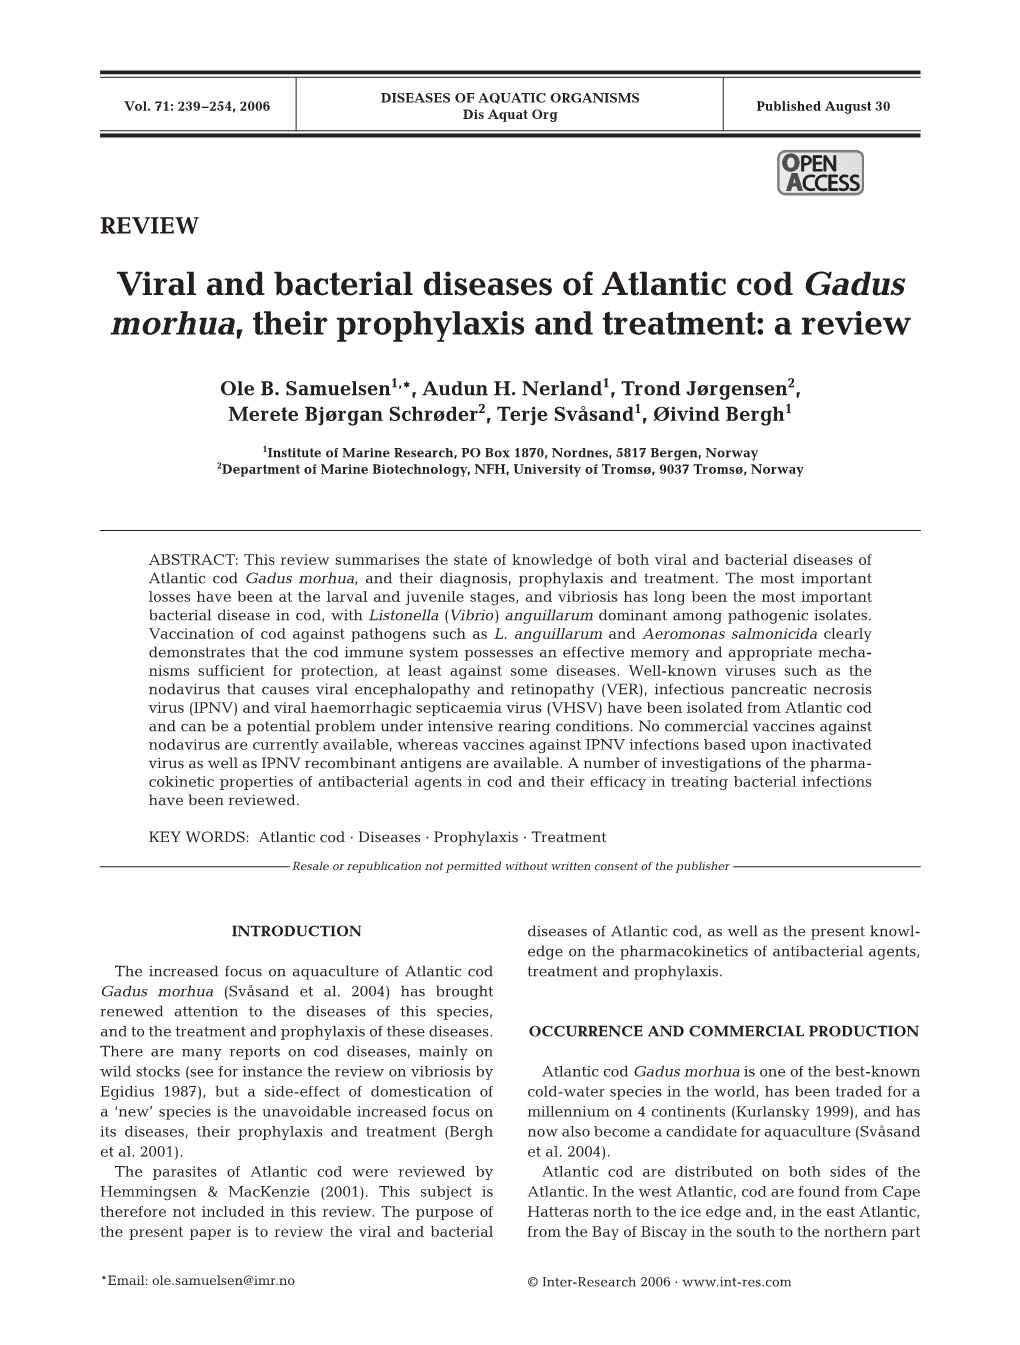 Viral and Bacterial Diseases of Atlantic Cod Gadus Morhua, Their Prophylaxis and Treatment: a Review